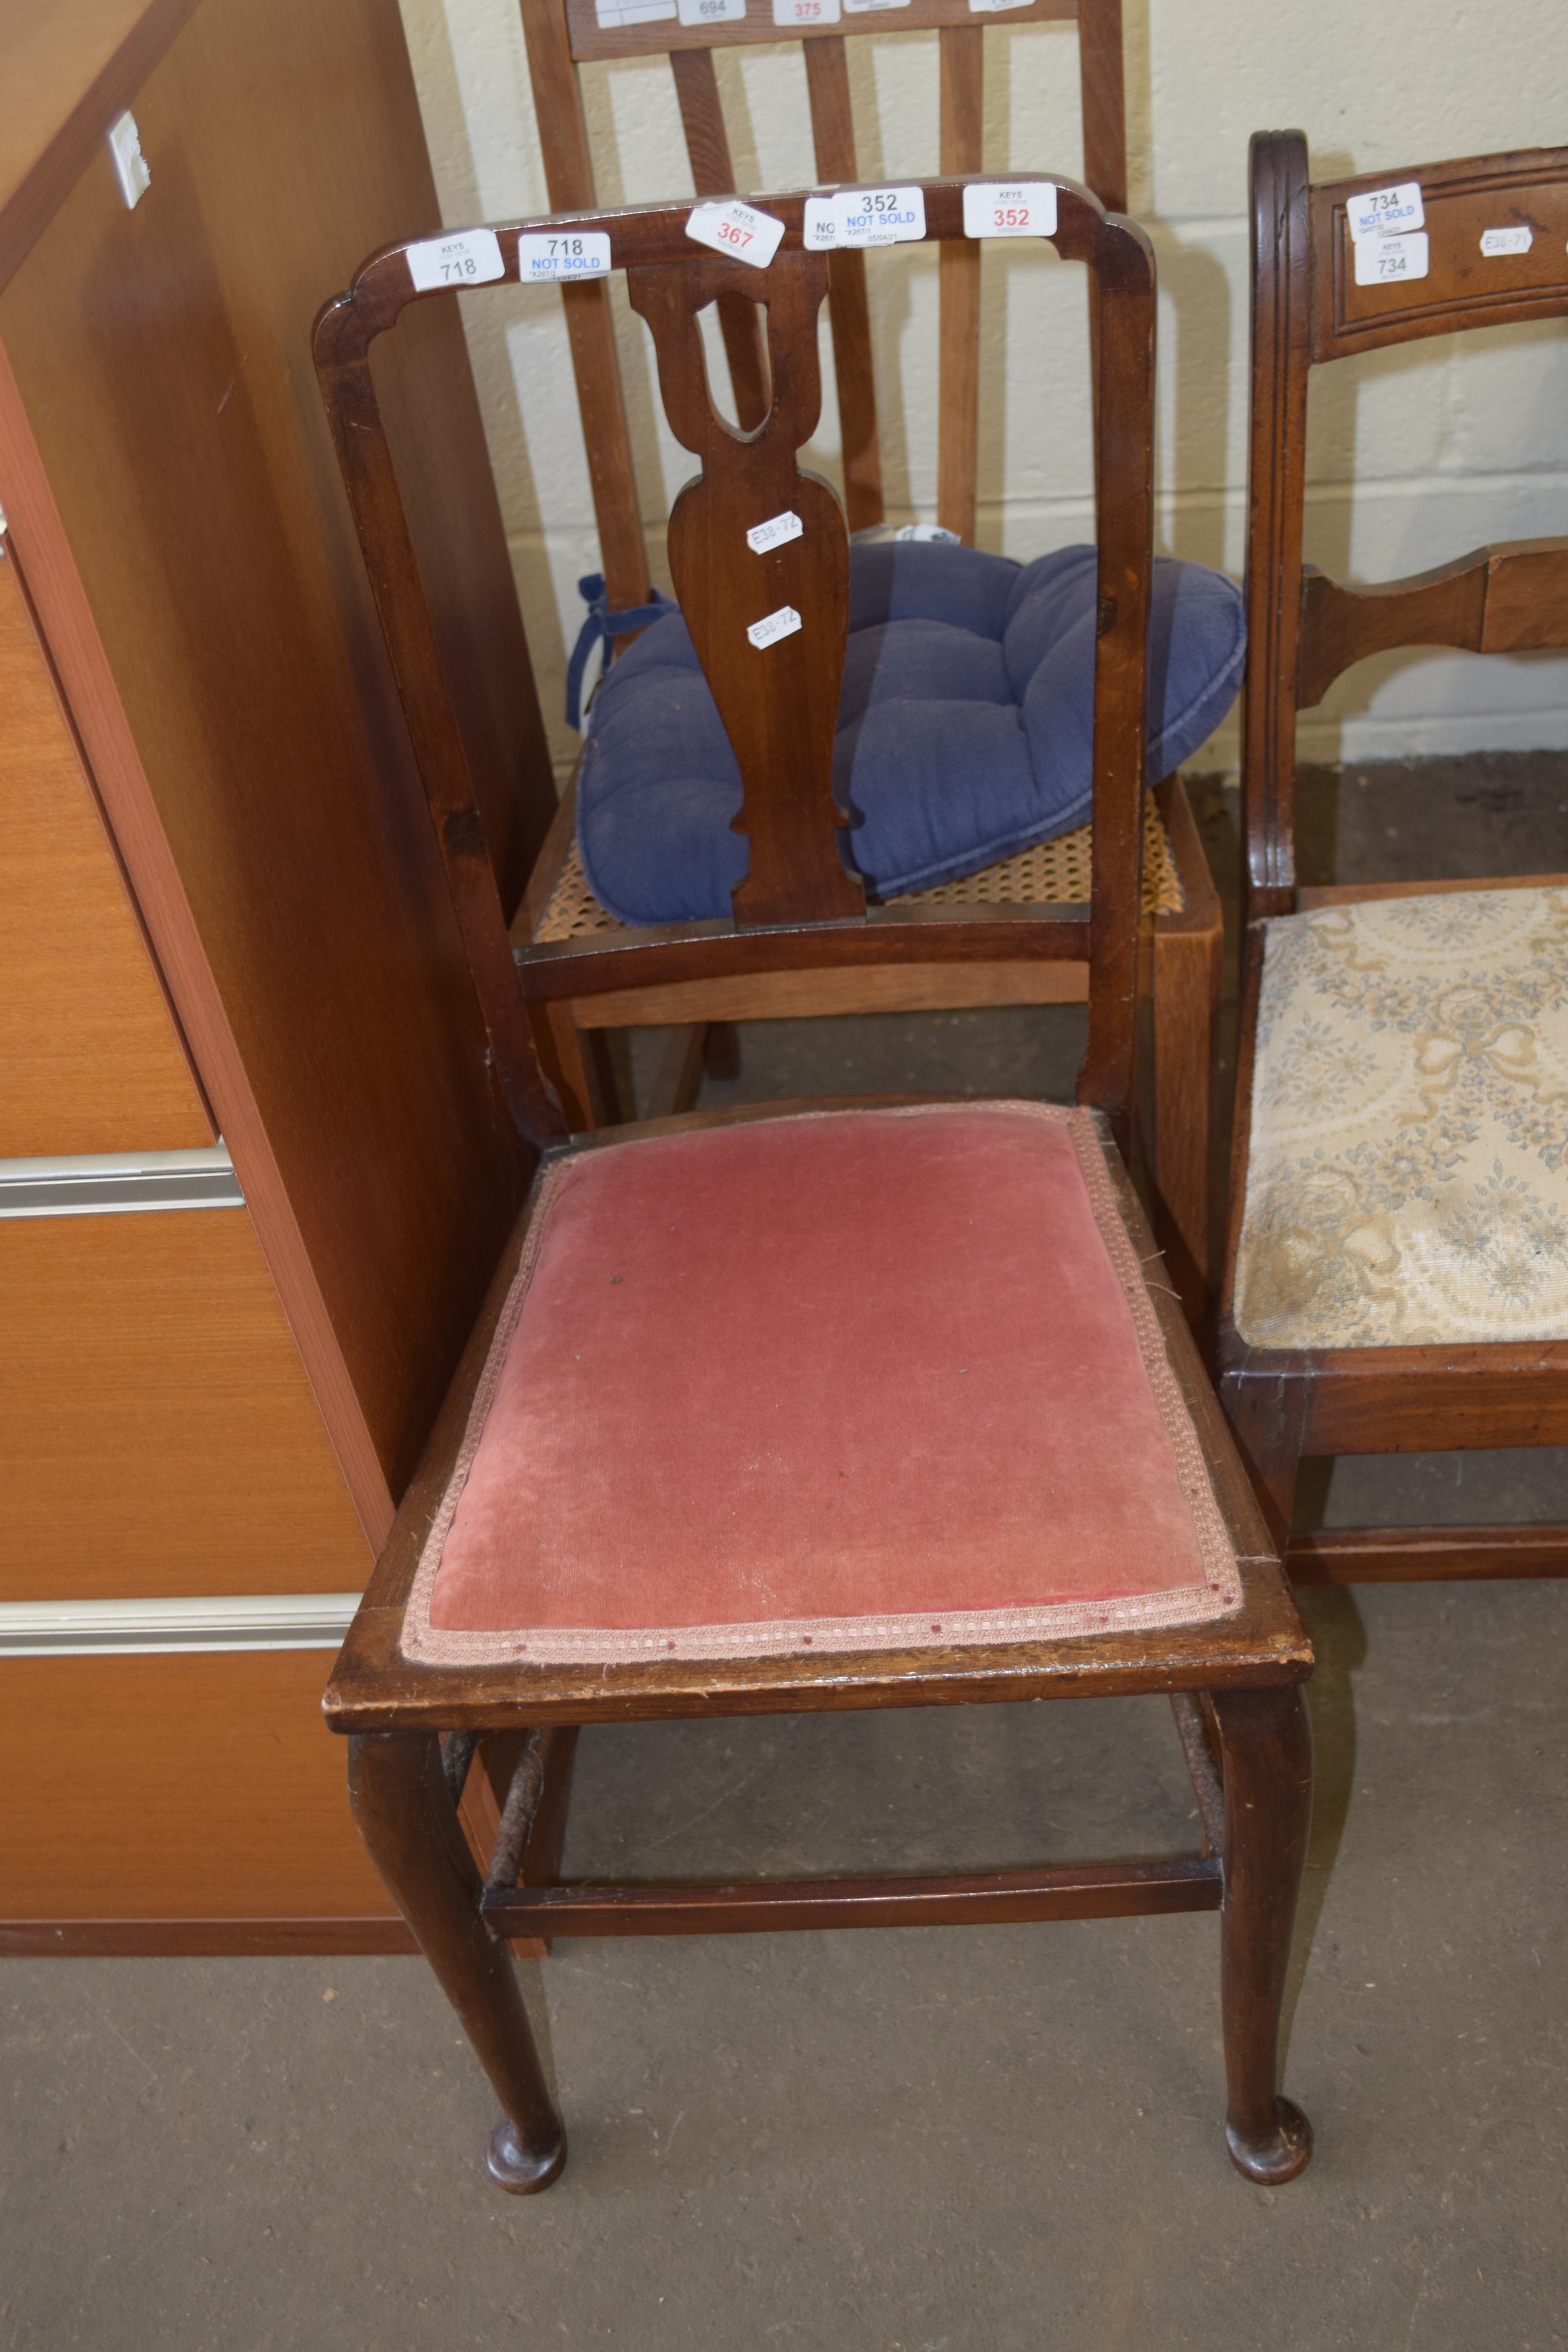 UPHOLSTERED BEDROOM CHAIR, HEIGHT APPROX 90CM